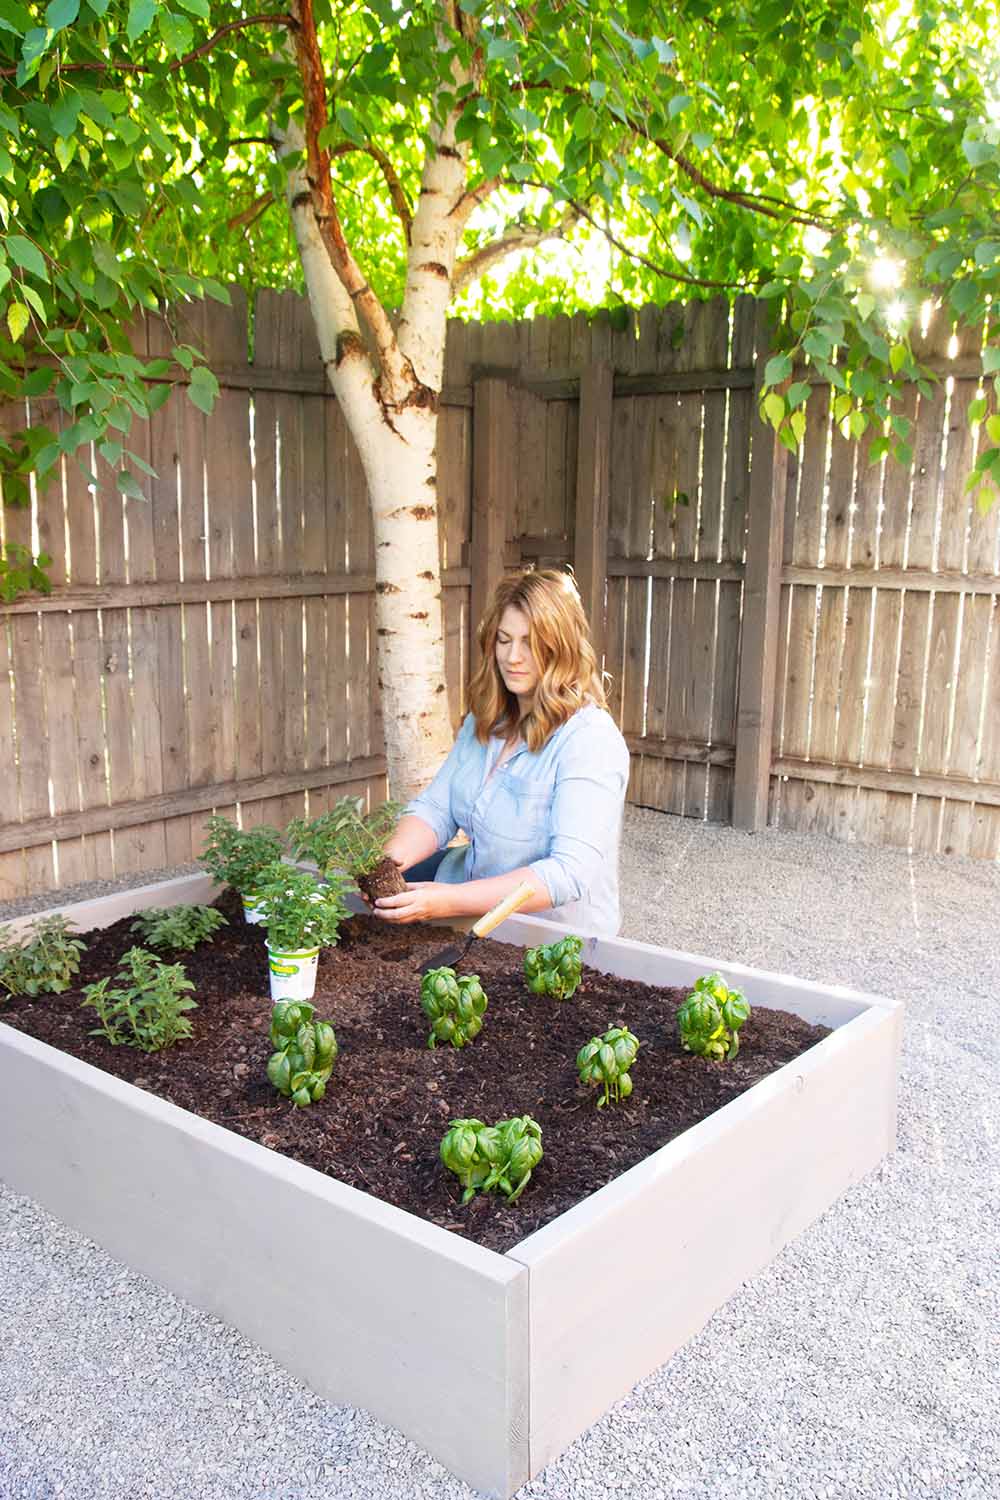 A woman planting herbs in a raised garden bed.